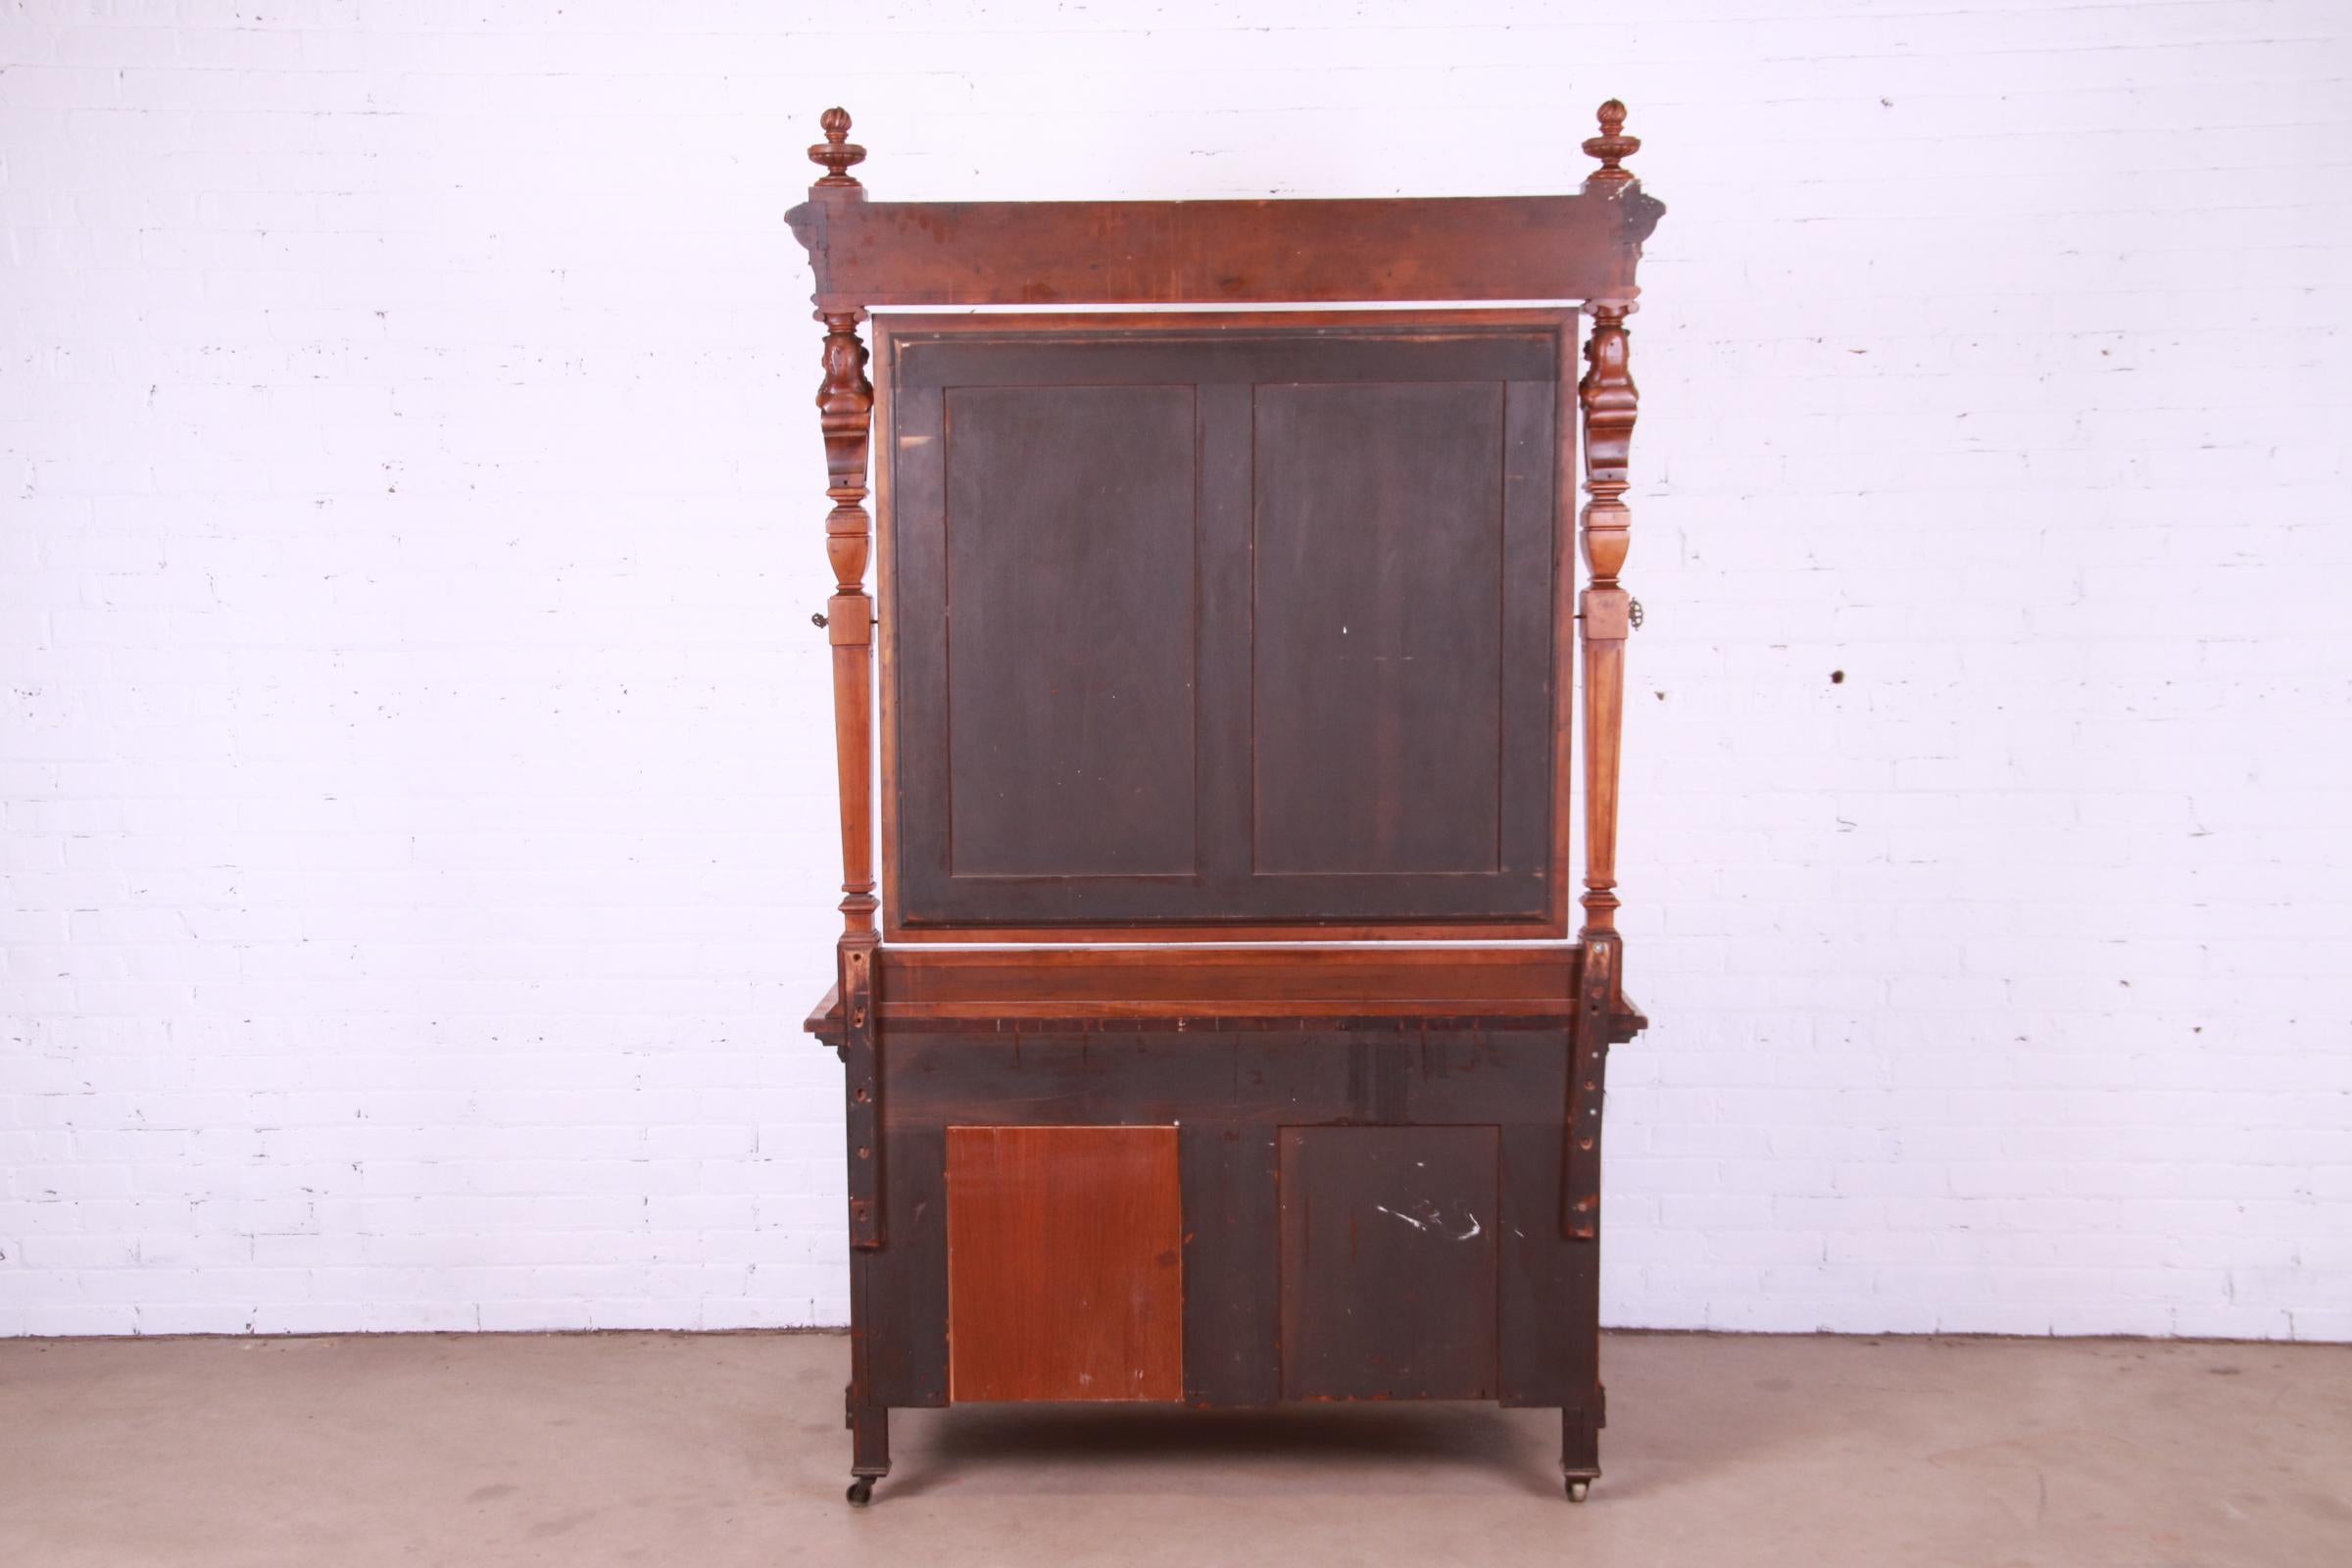 Antique Victorian Ornate Carved Walnut Dresser with Mirror Attributed to Horner For Sale 7